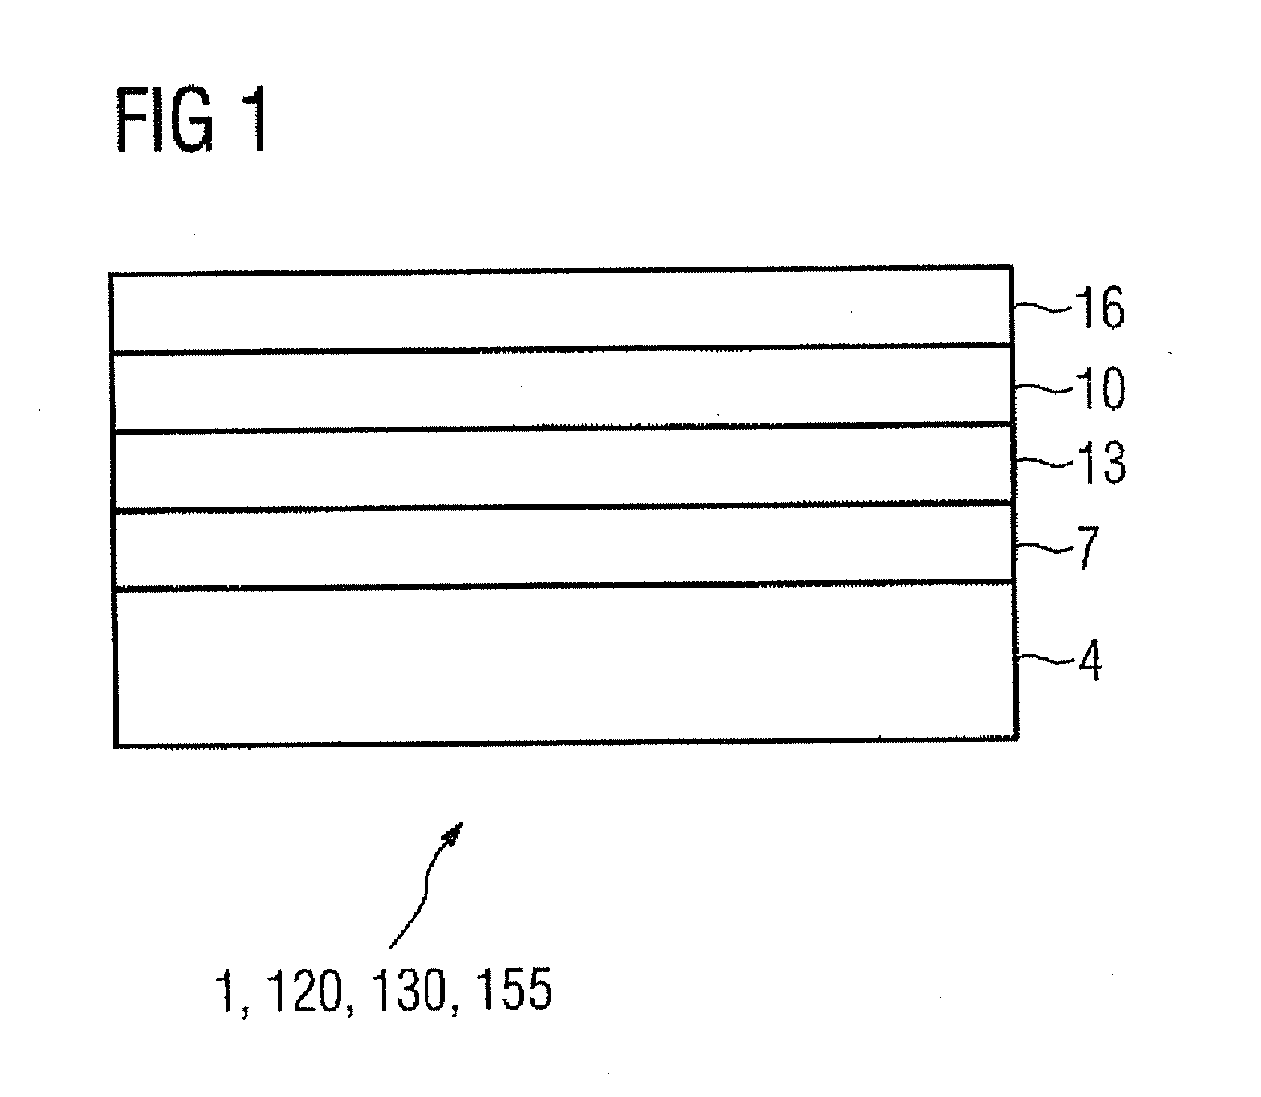 Multiple layer system comprising a metallic layer and a ceramic layer